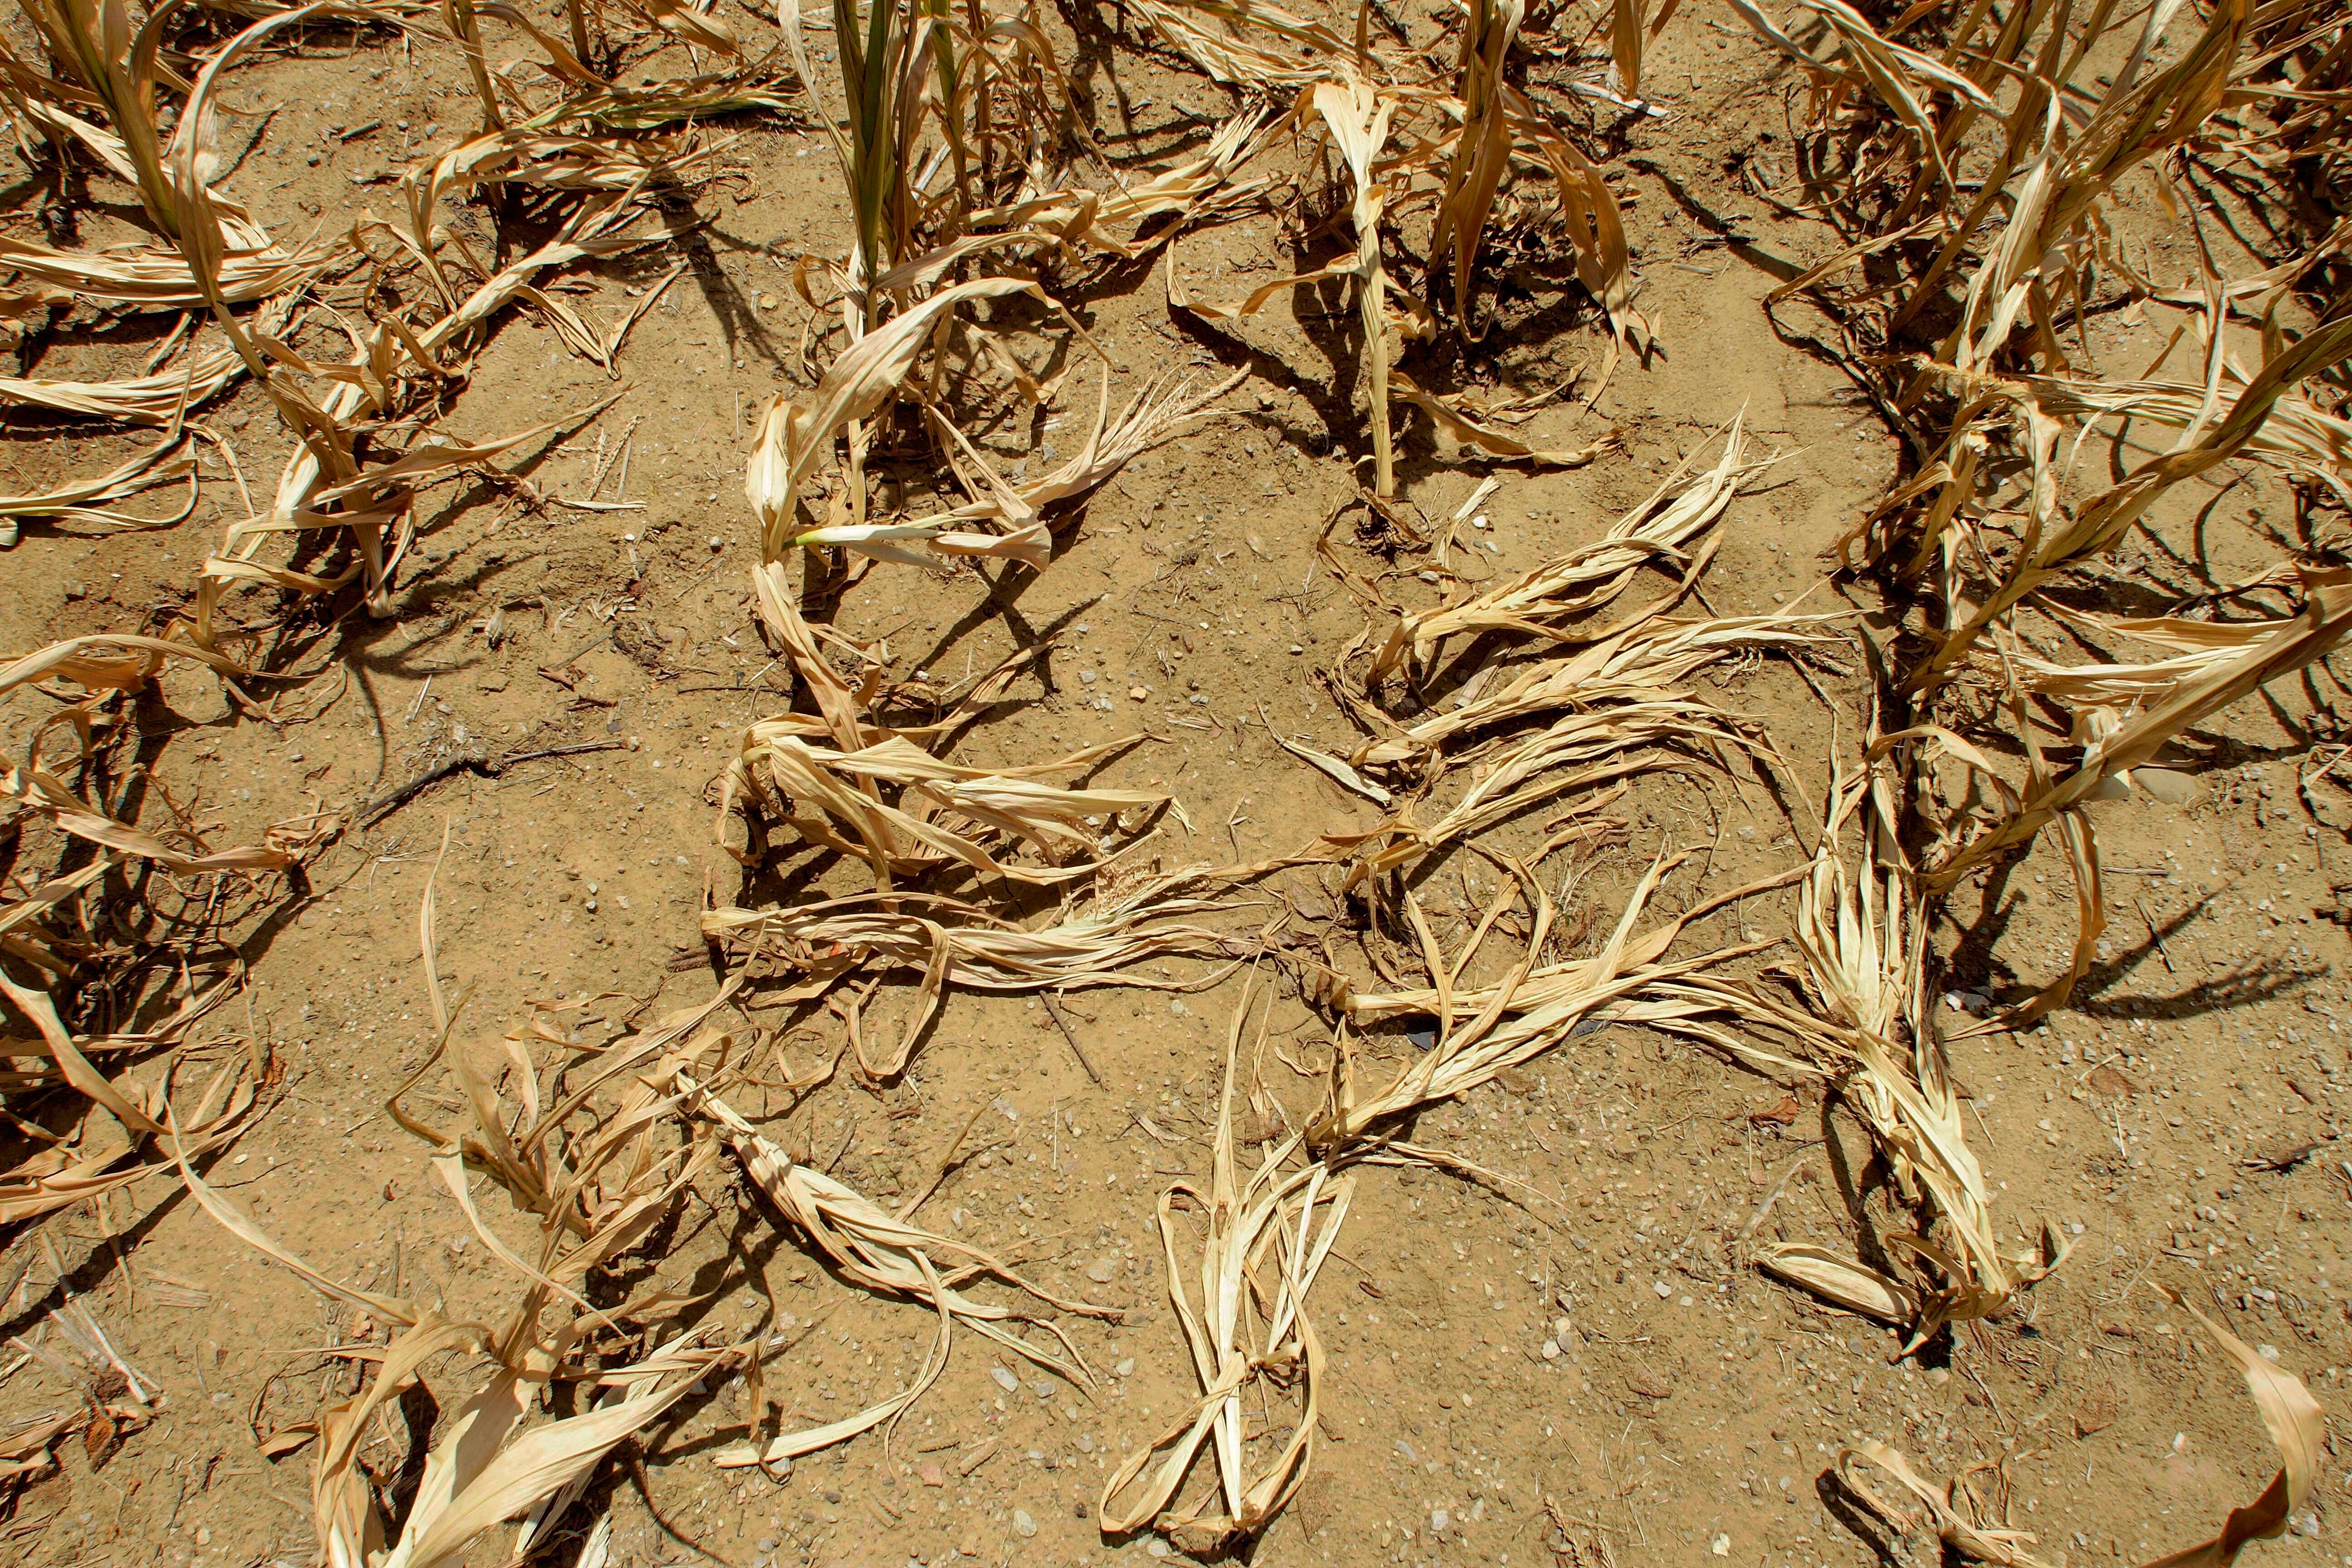 Climate-Related Drought Disasters Threaten Development, UN Warns | Voice of America